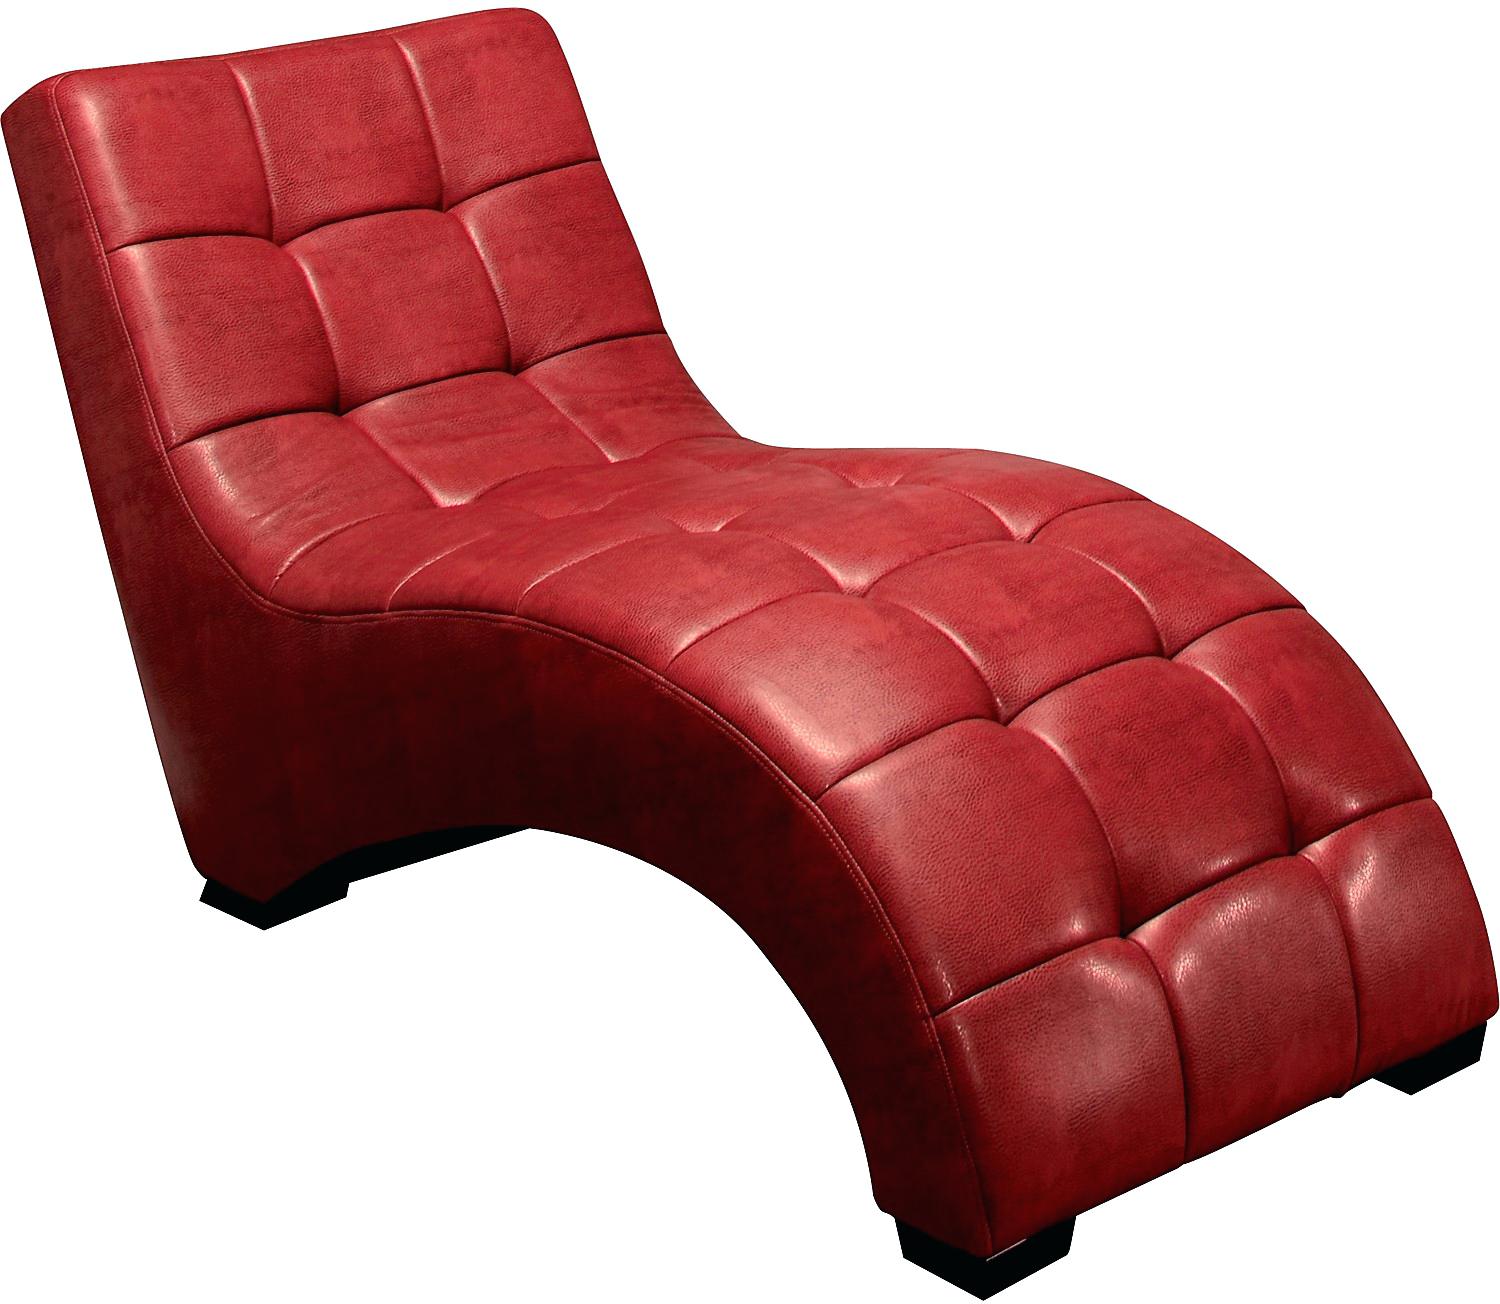 Red Chaise Lounge photo - 7